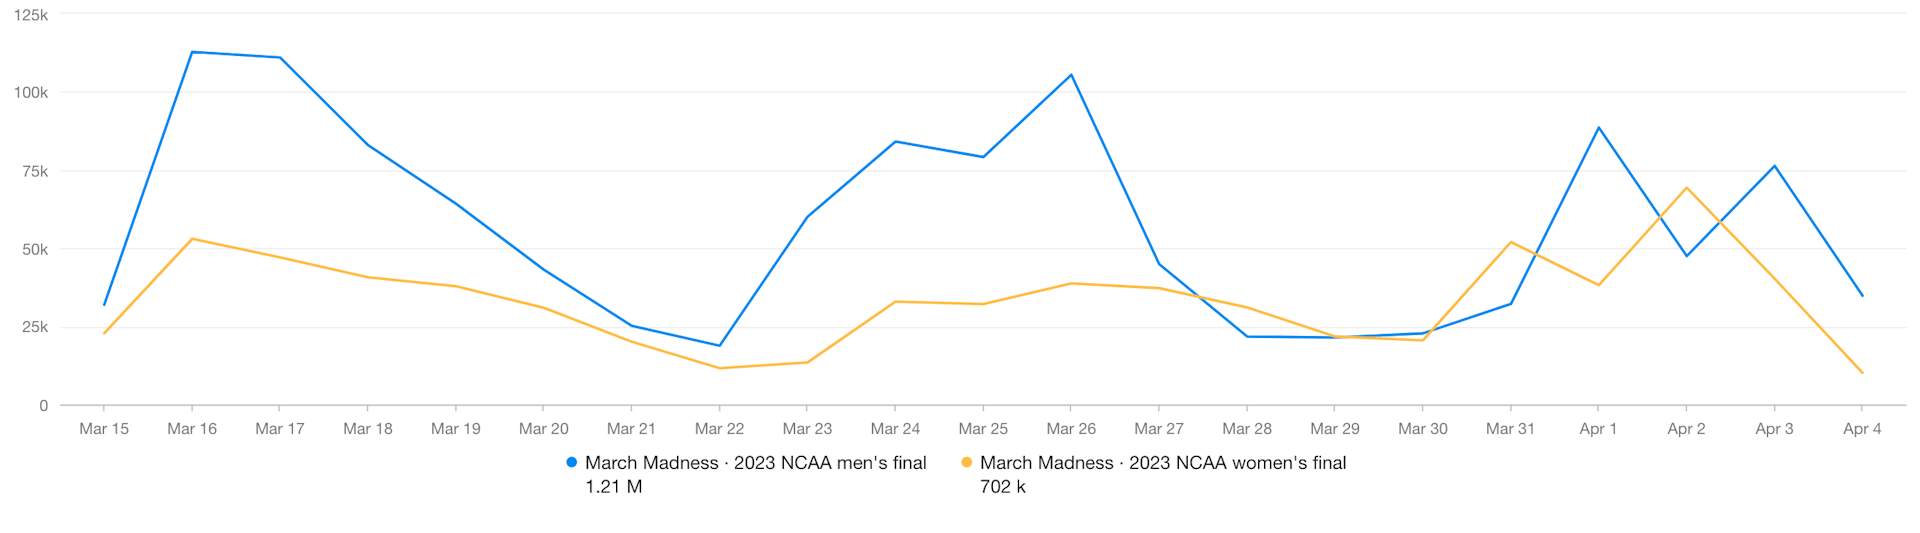 A graph with two lines showing mentions of the men's and women's March Madness games over time. The men's line is consistently higher than the women's line except for on March 28 and 31 and April 2. 